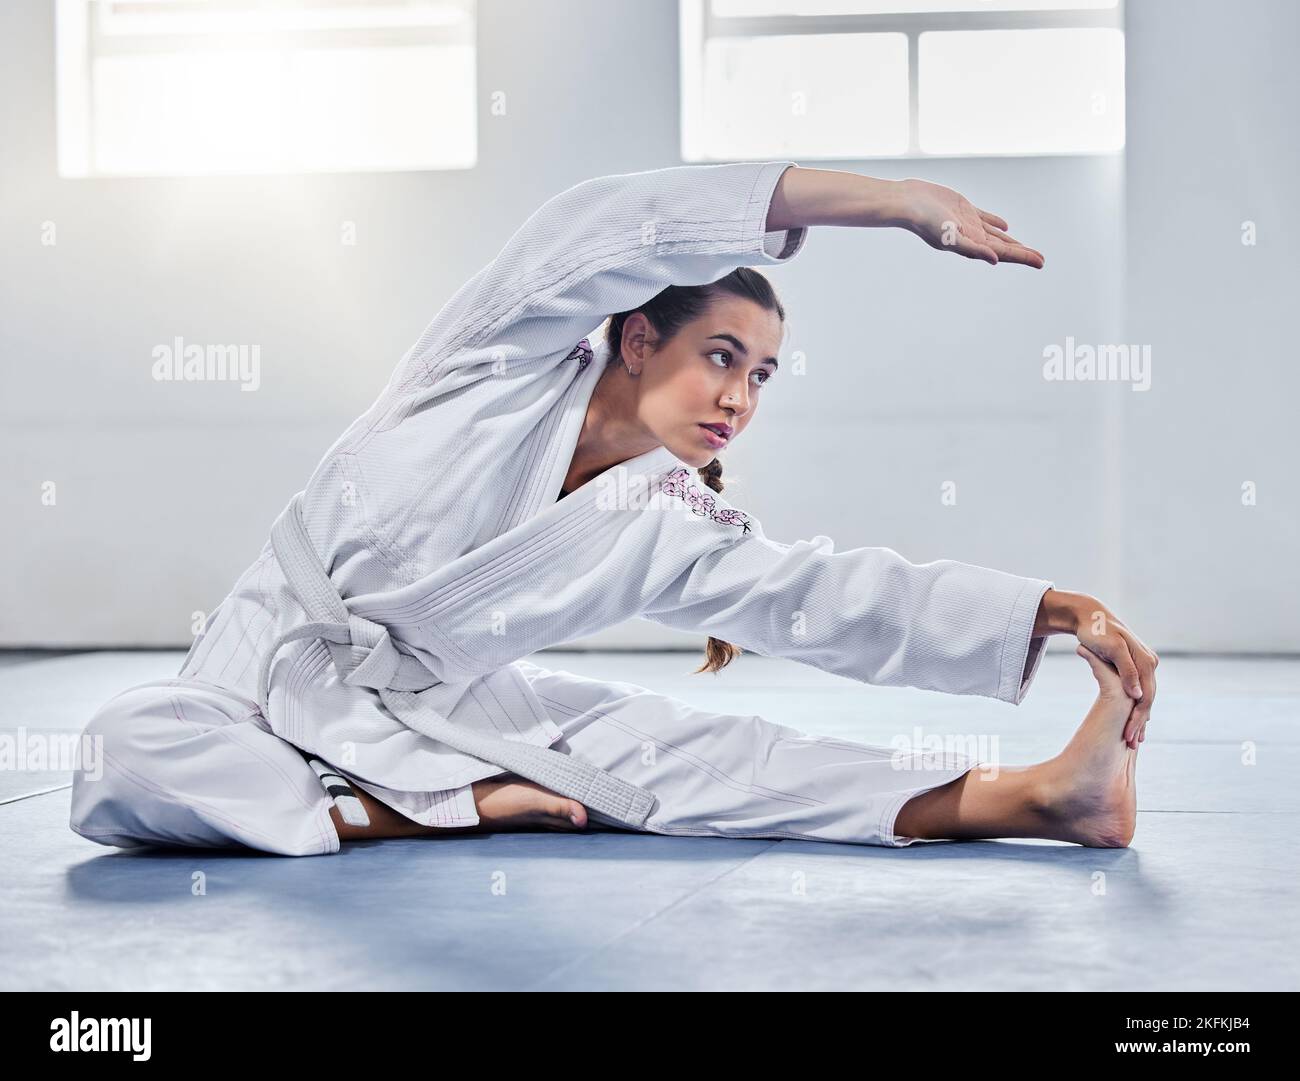 Martial arts, karate or woman stretching before training practice, fitness workout or challenge competition. Girl, warrior or taekwondo fighter warm Stock Photo